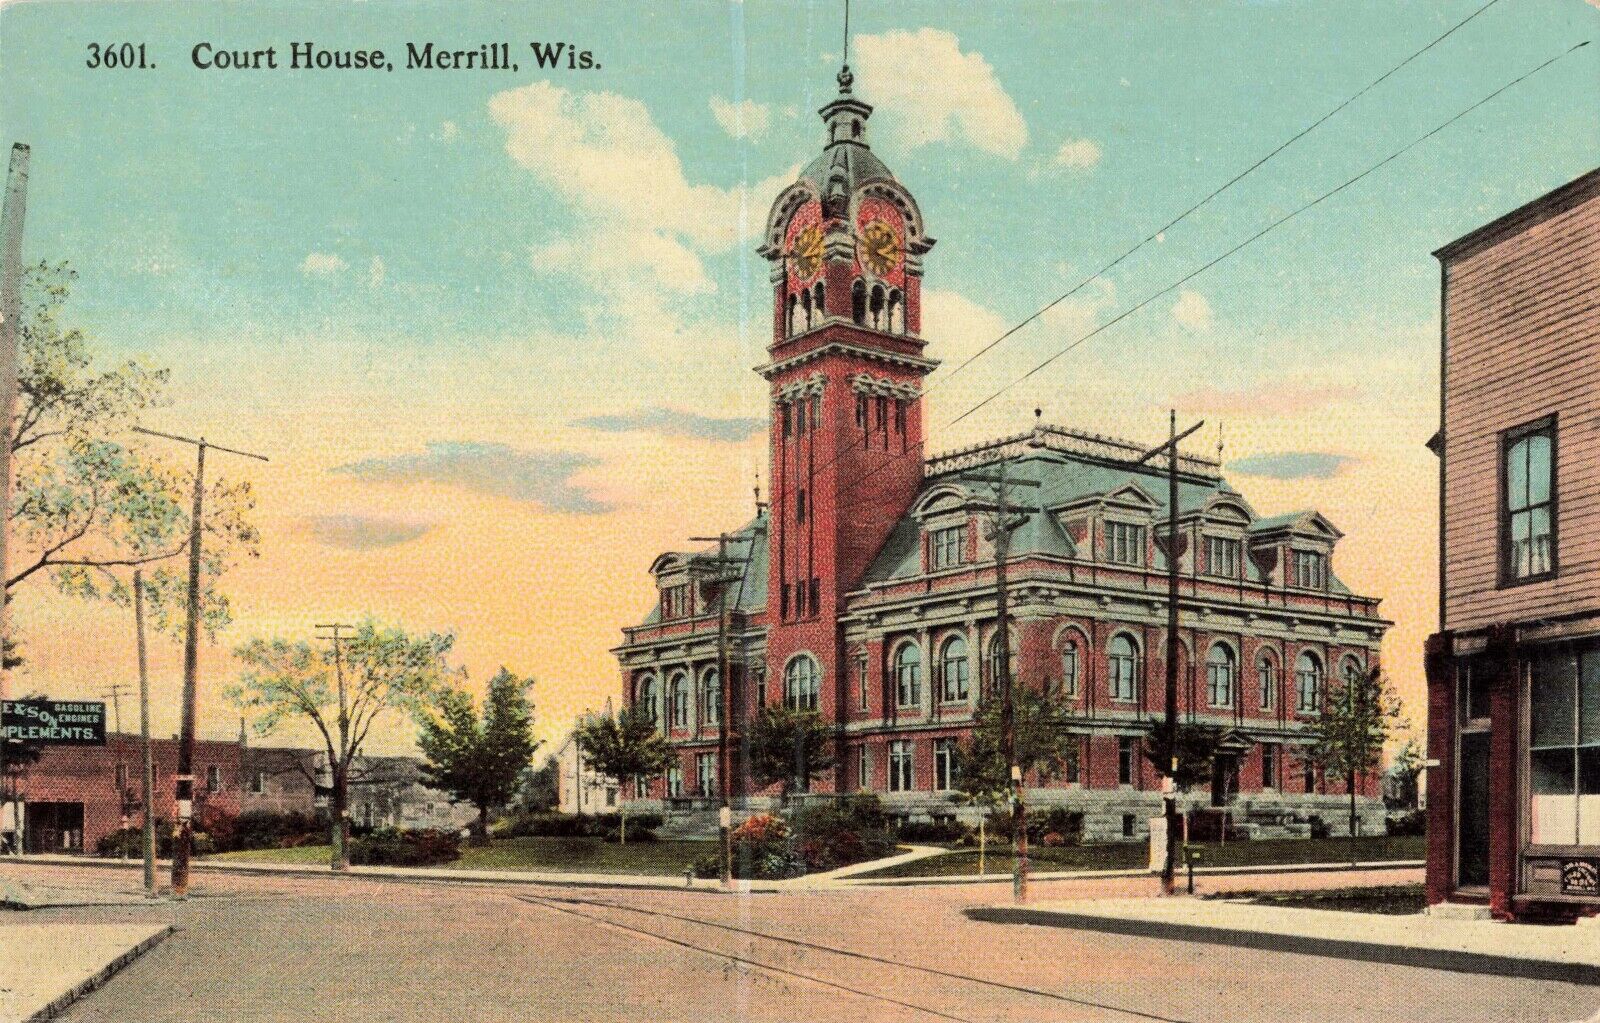 Court House Merrill Wisconsin WI Street View c1910 Postcard